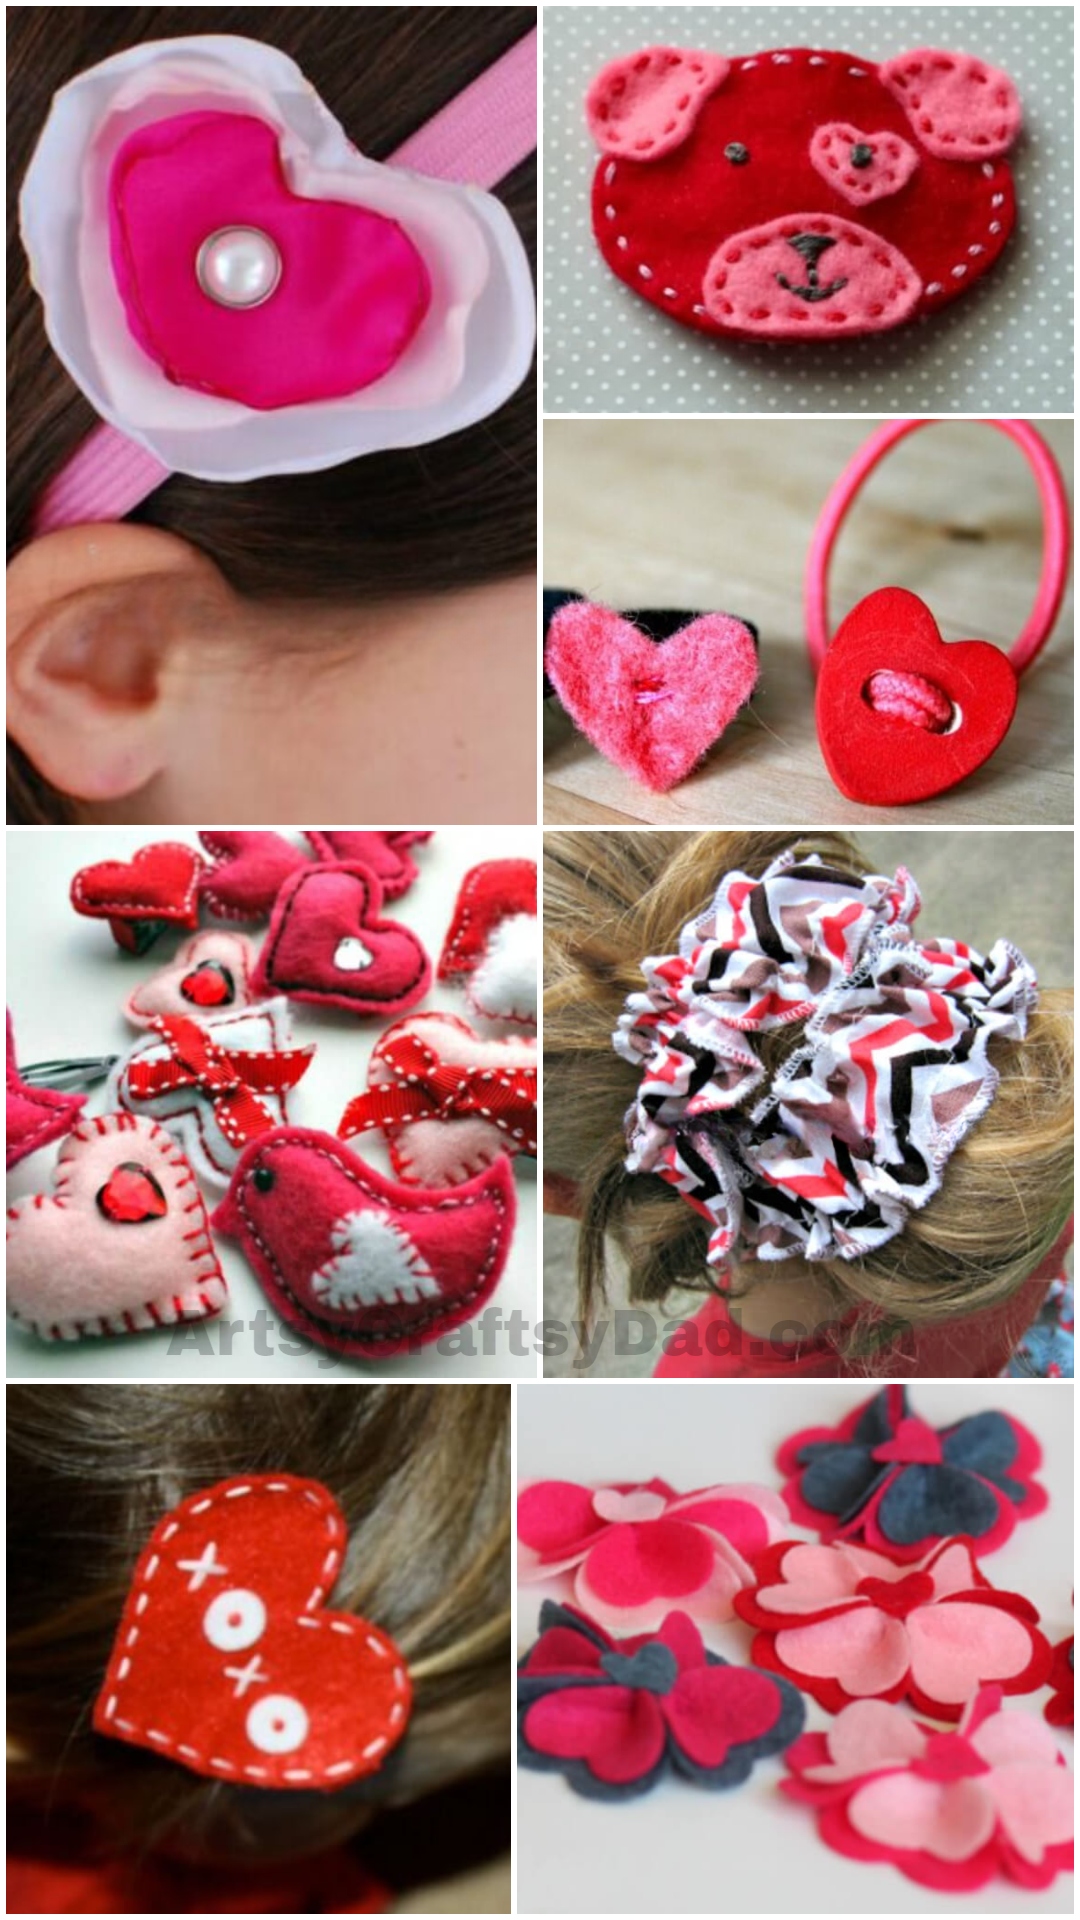 Hair Bow Craft Ideas to Celebrate Valentine’s Day